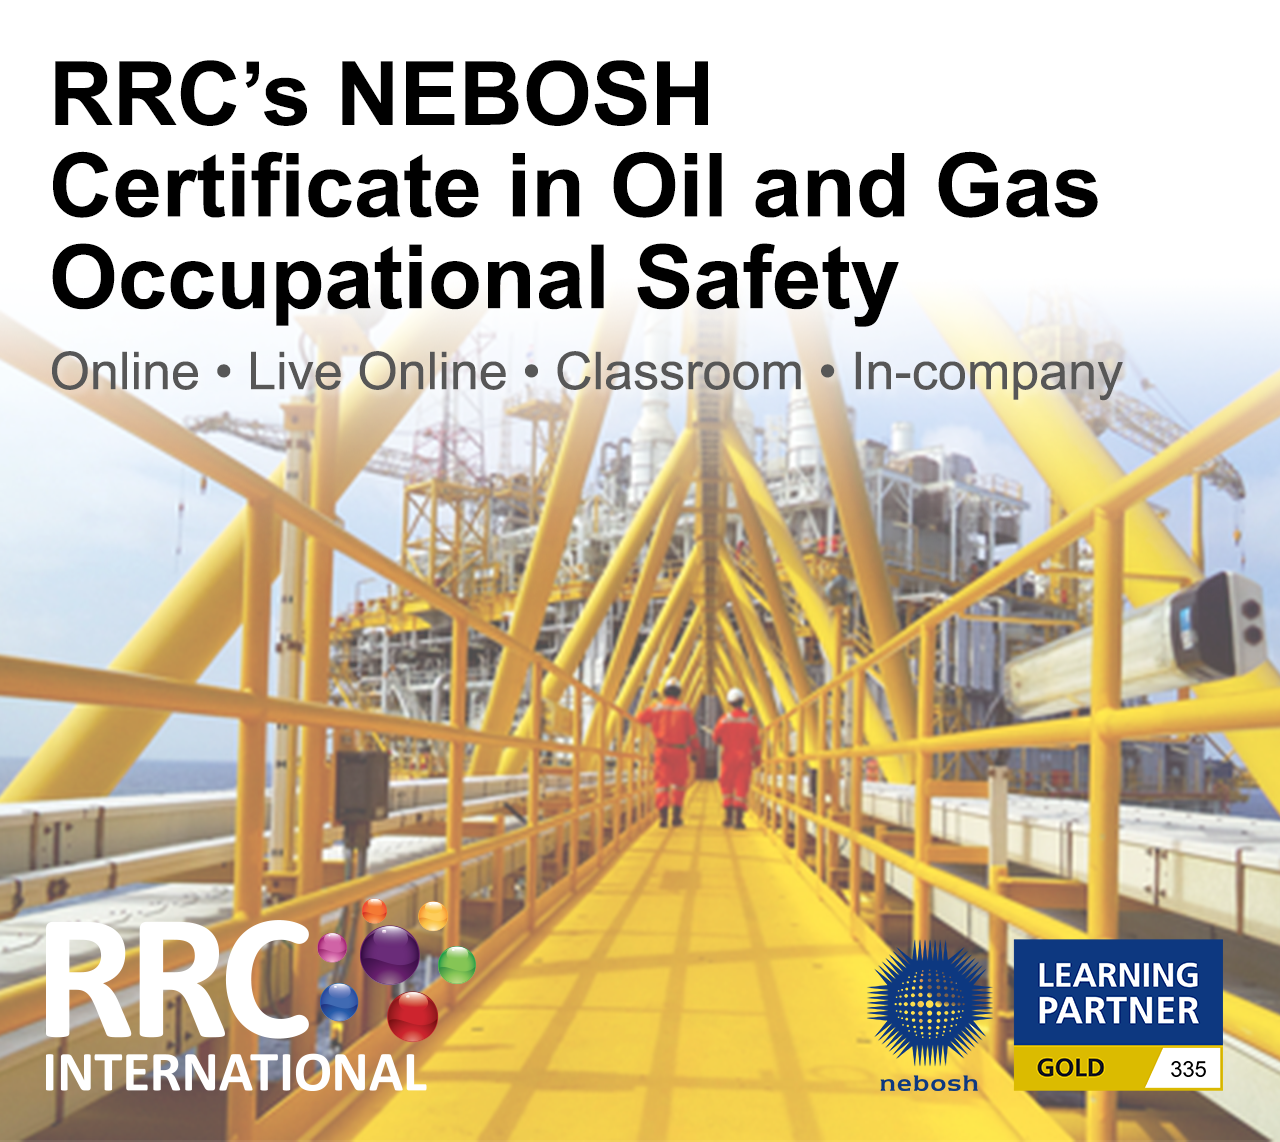 RRC's NEBOSH International Technical Certificate in Oil and Gas Operational Safety